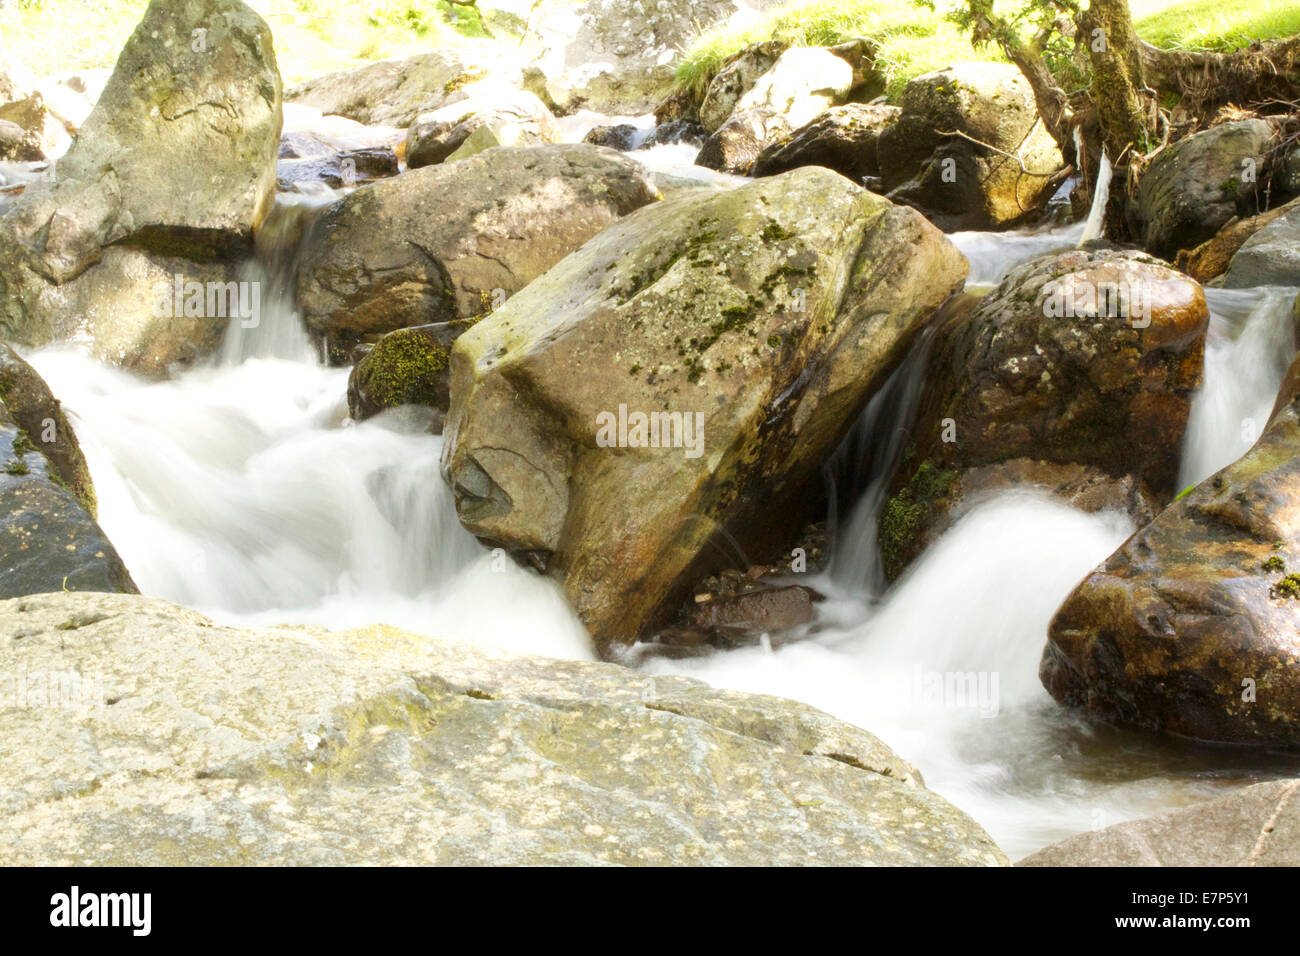 Fast flowing river over rocks showing a slow motion flow of the water. Stock Photo